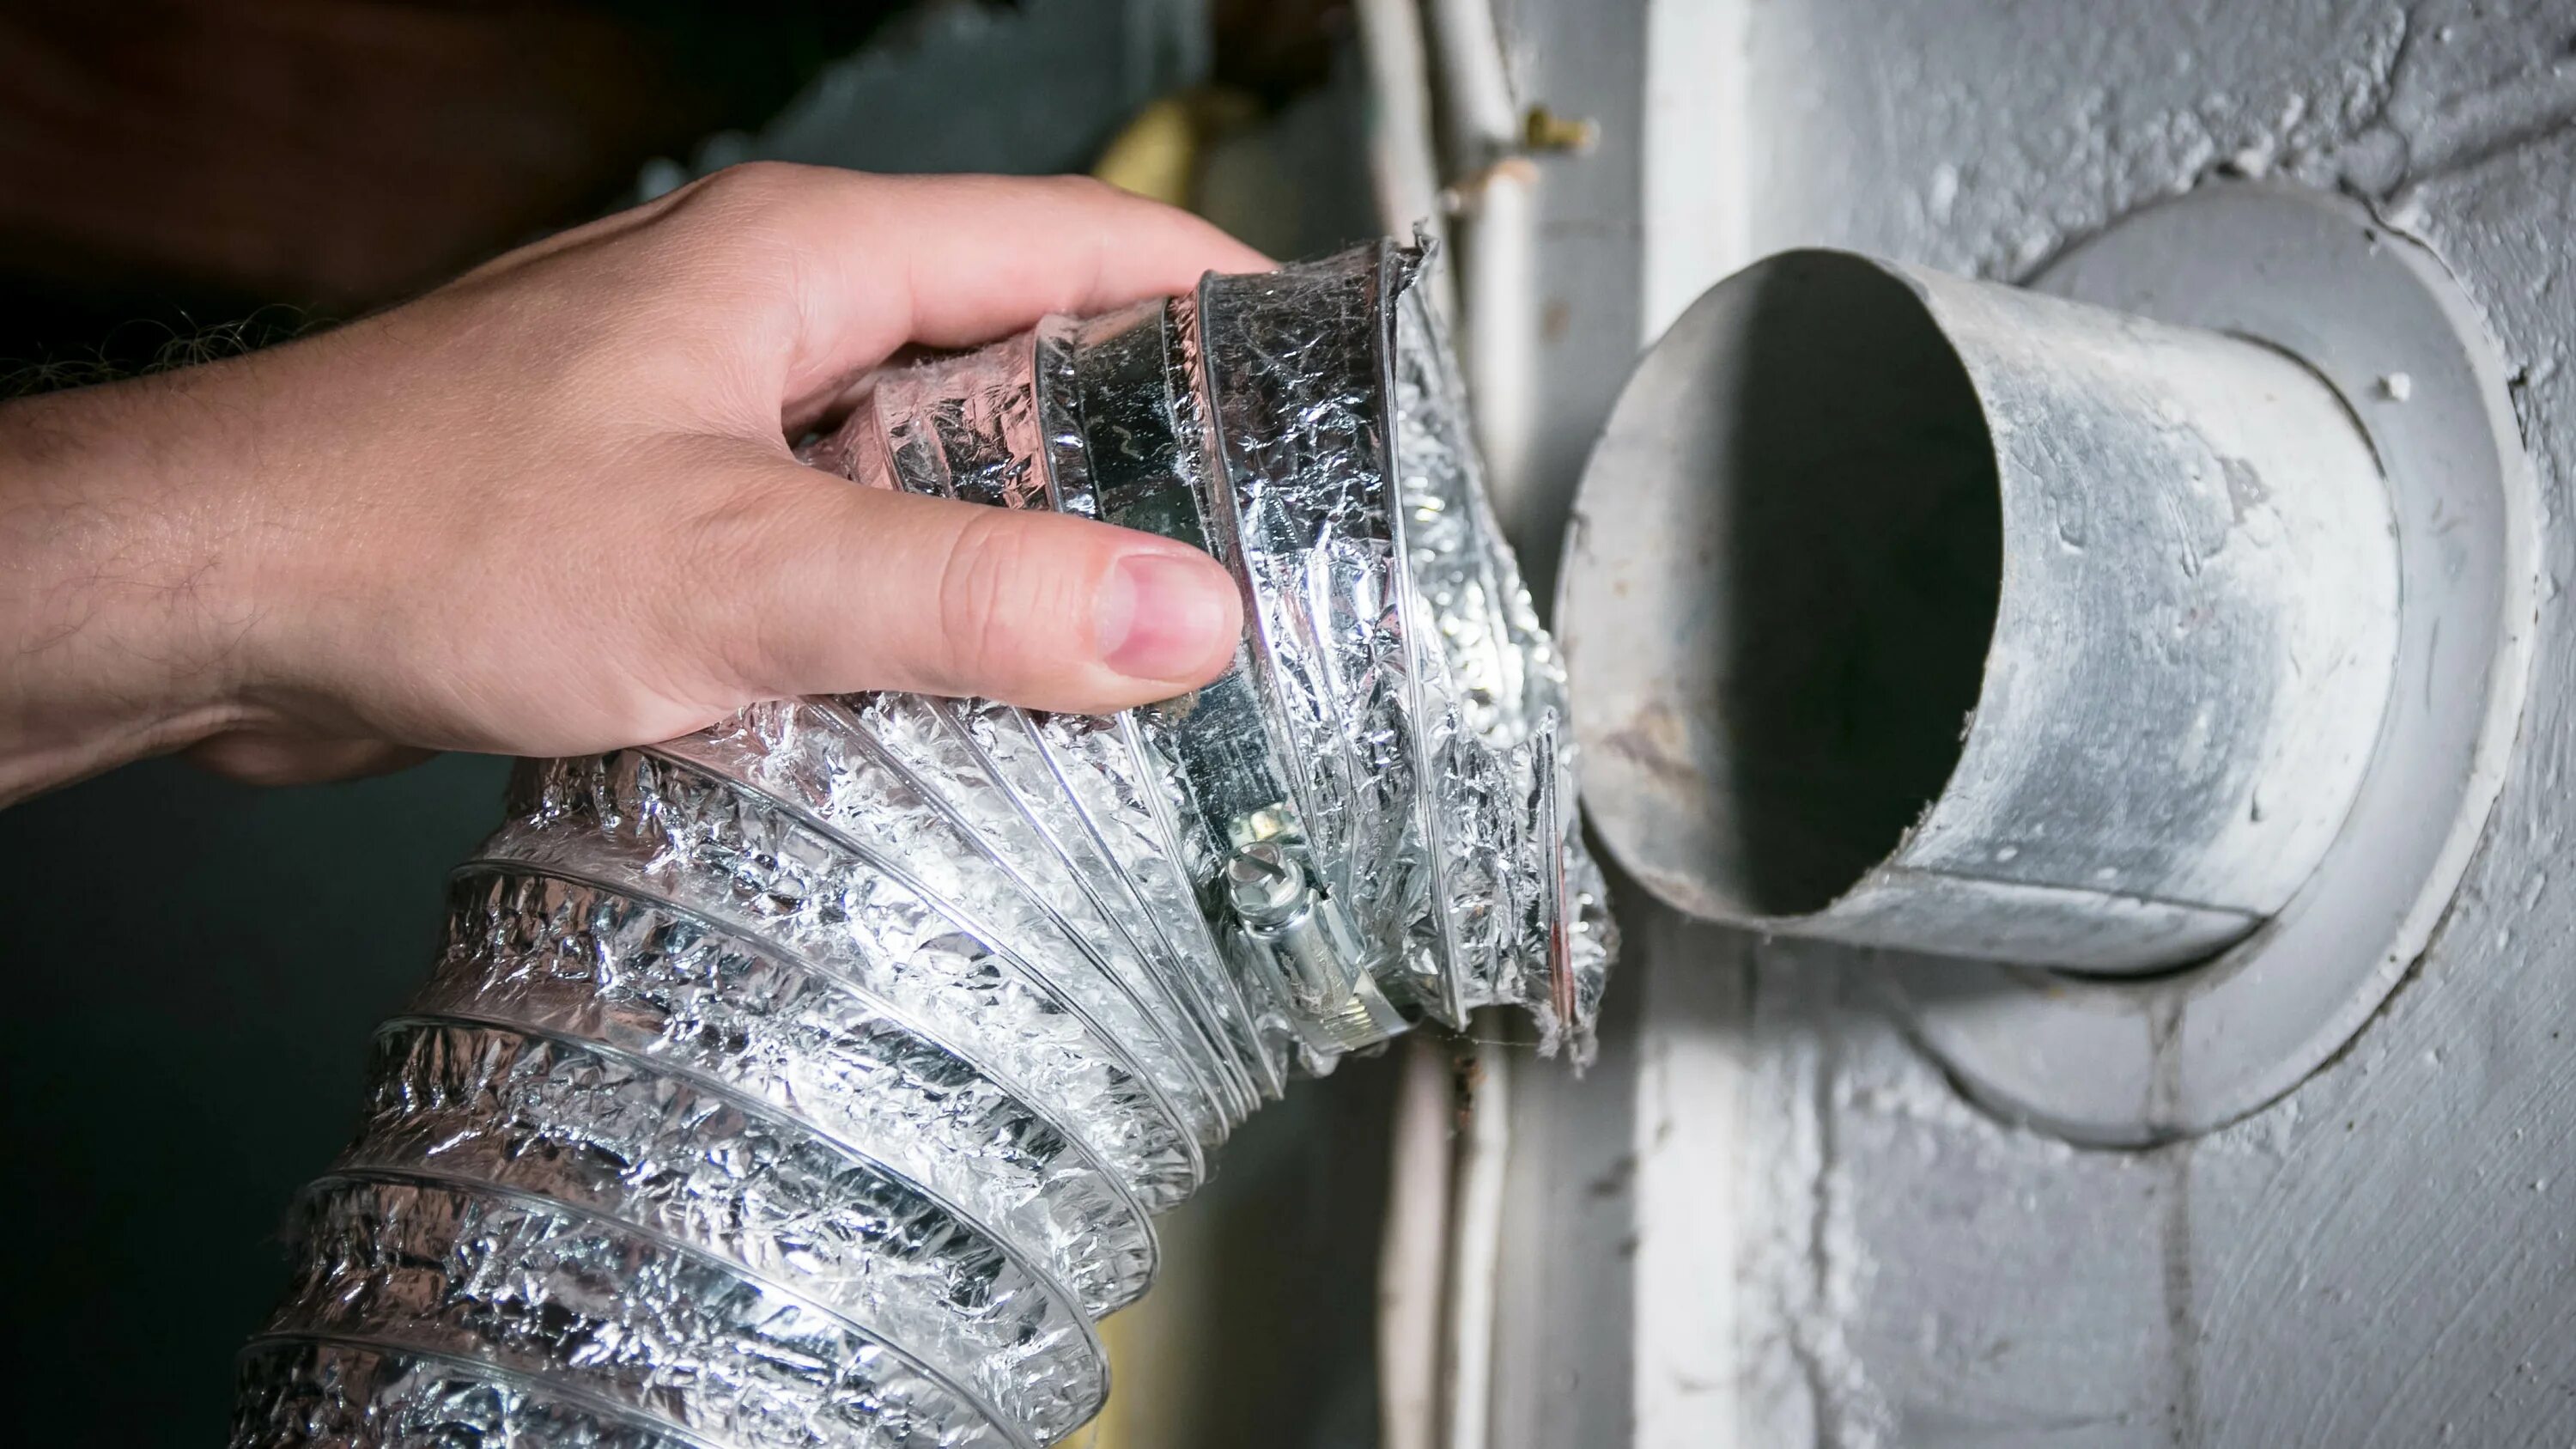 Airduct and Dryer Vent Cleaning services. Dryer Vent Cleaning. Заделка вентиляционных отверстий. Вентиляционное отверстие. Прочистили дырки